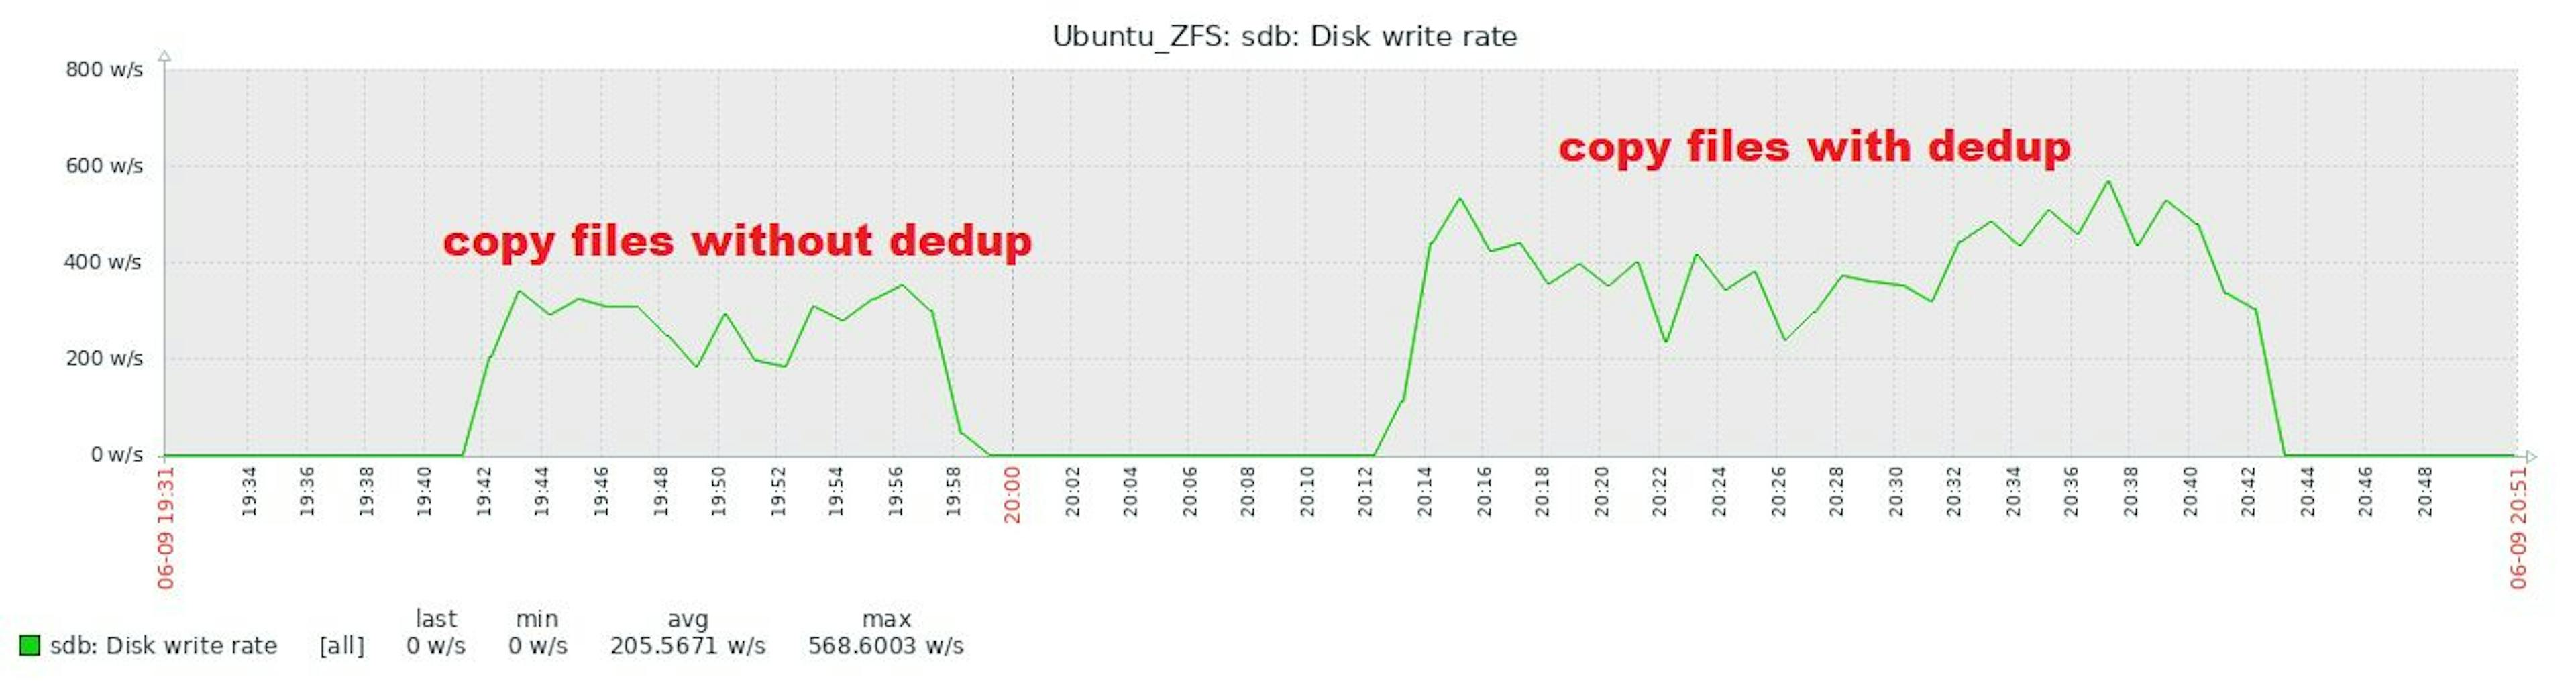 1.7.1 ZFS sdb disk write rate full